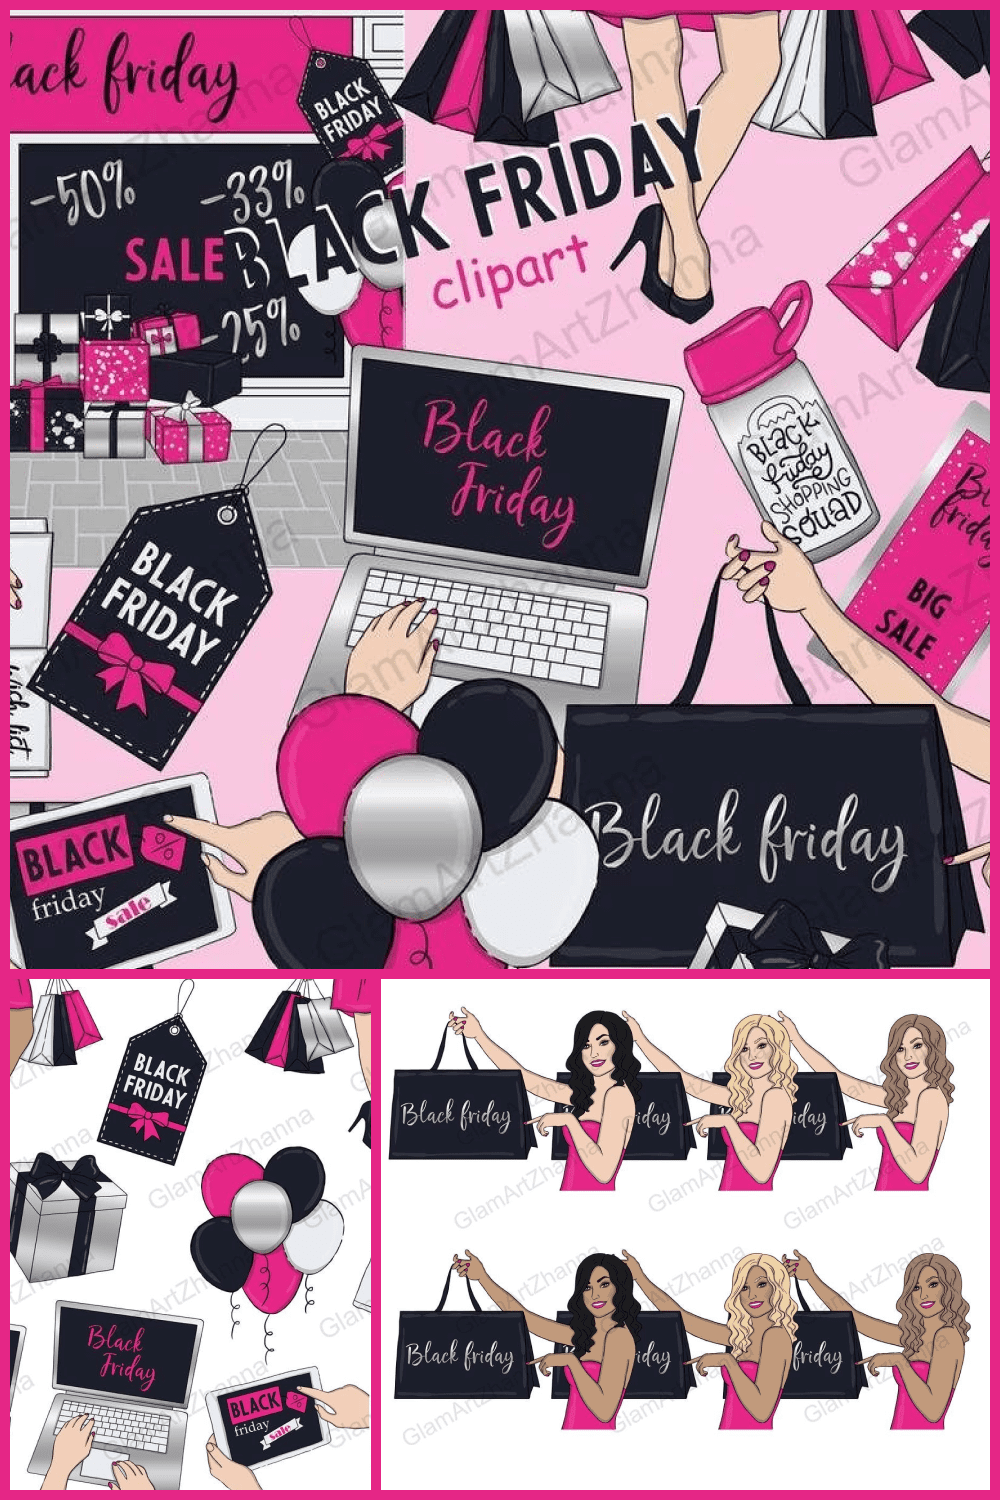 Mix of clipart with girls with bags, balloons, stickers, banners for Black Friday.